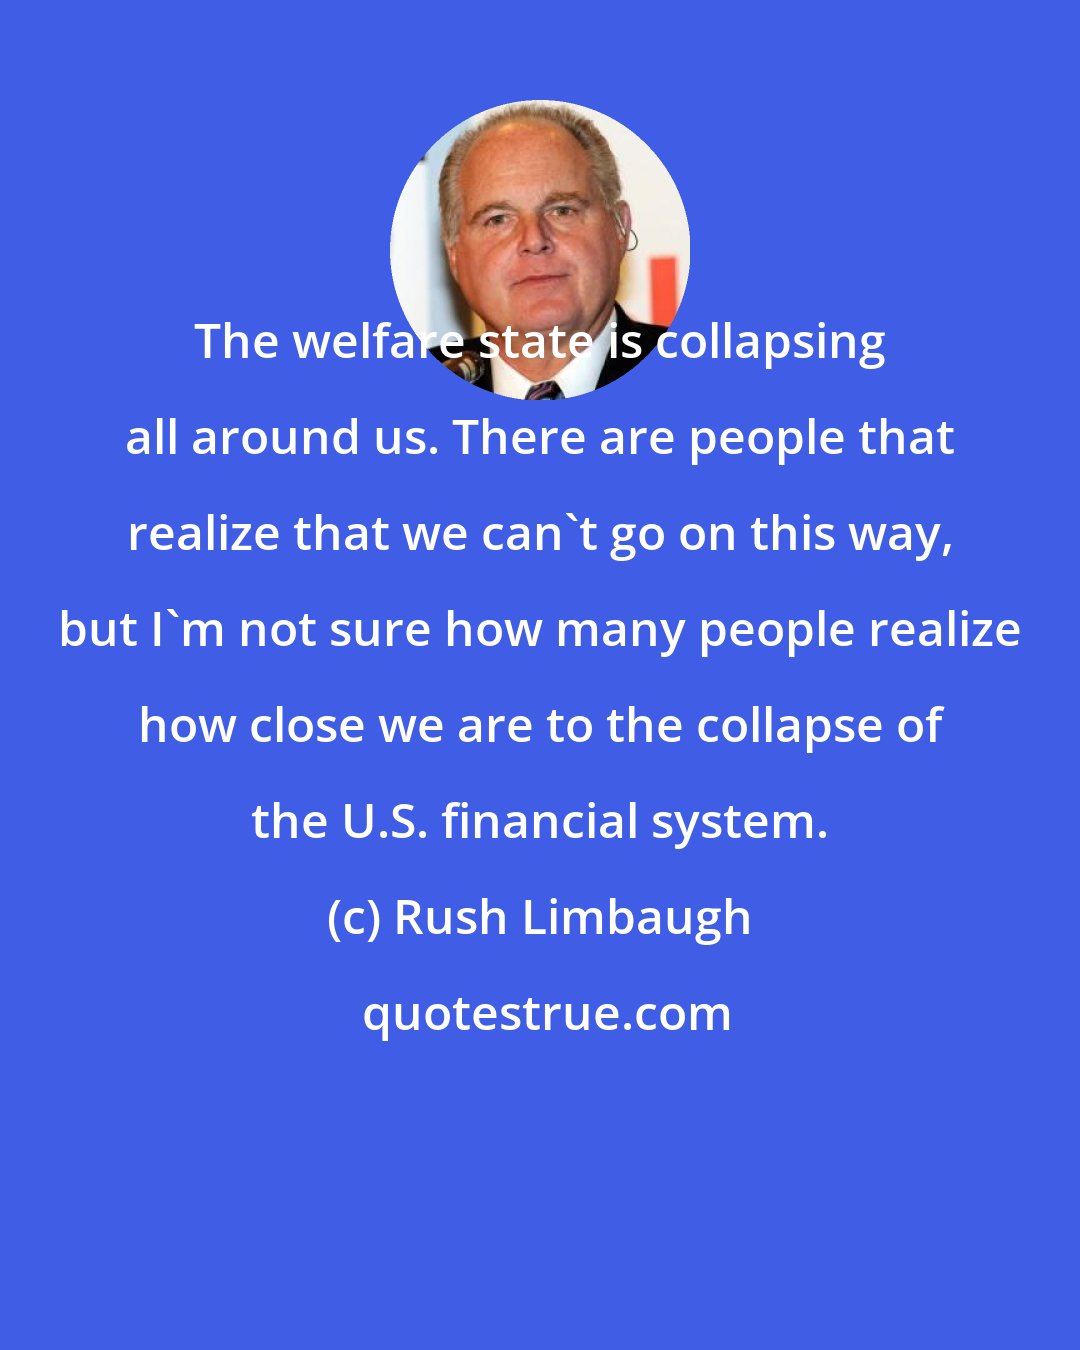 Rush Limbaugh: The welfare state is collapsing all around us. There are people that realize that we can't go on this way, but I'm not sure how many people realize how close we are to the collapse of the U.S. financial system.